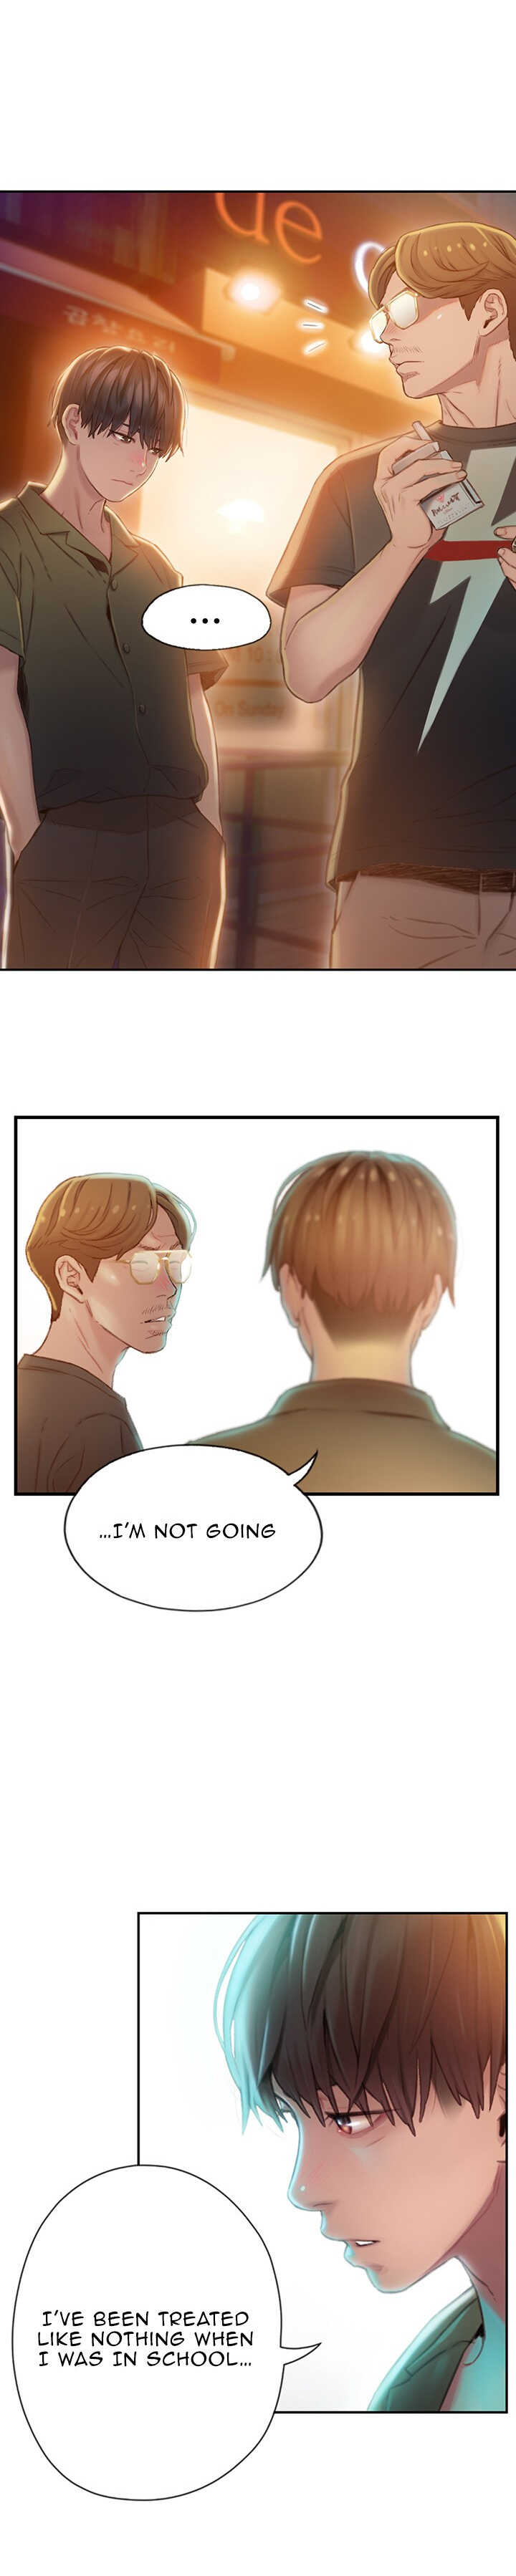 [Park Hyeongjun] Love Limit Exceeded (01-24) Ongoing - Page 27